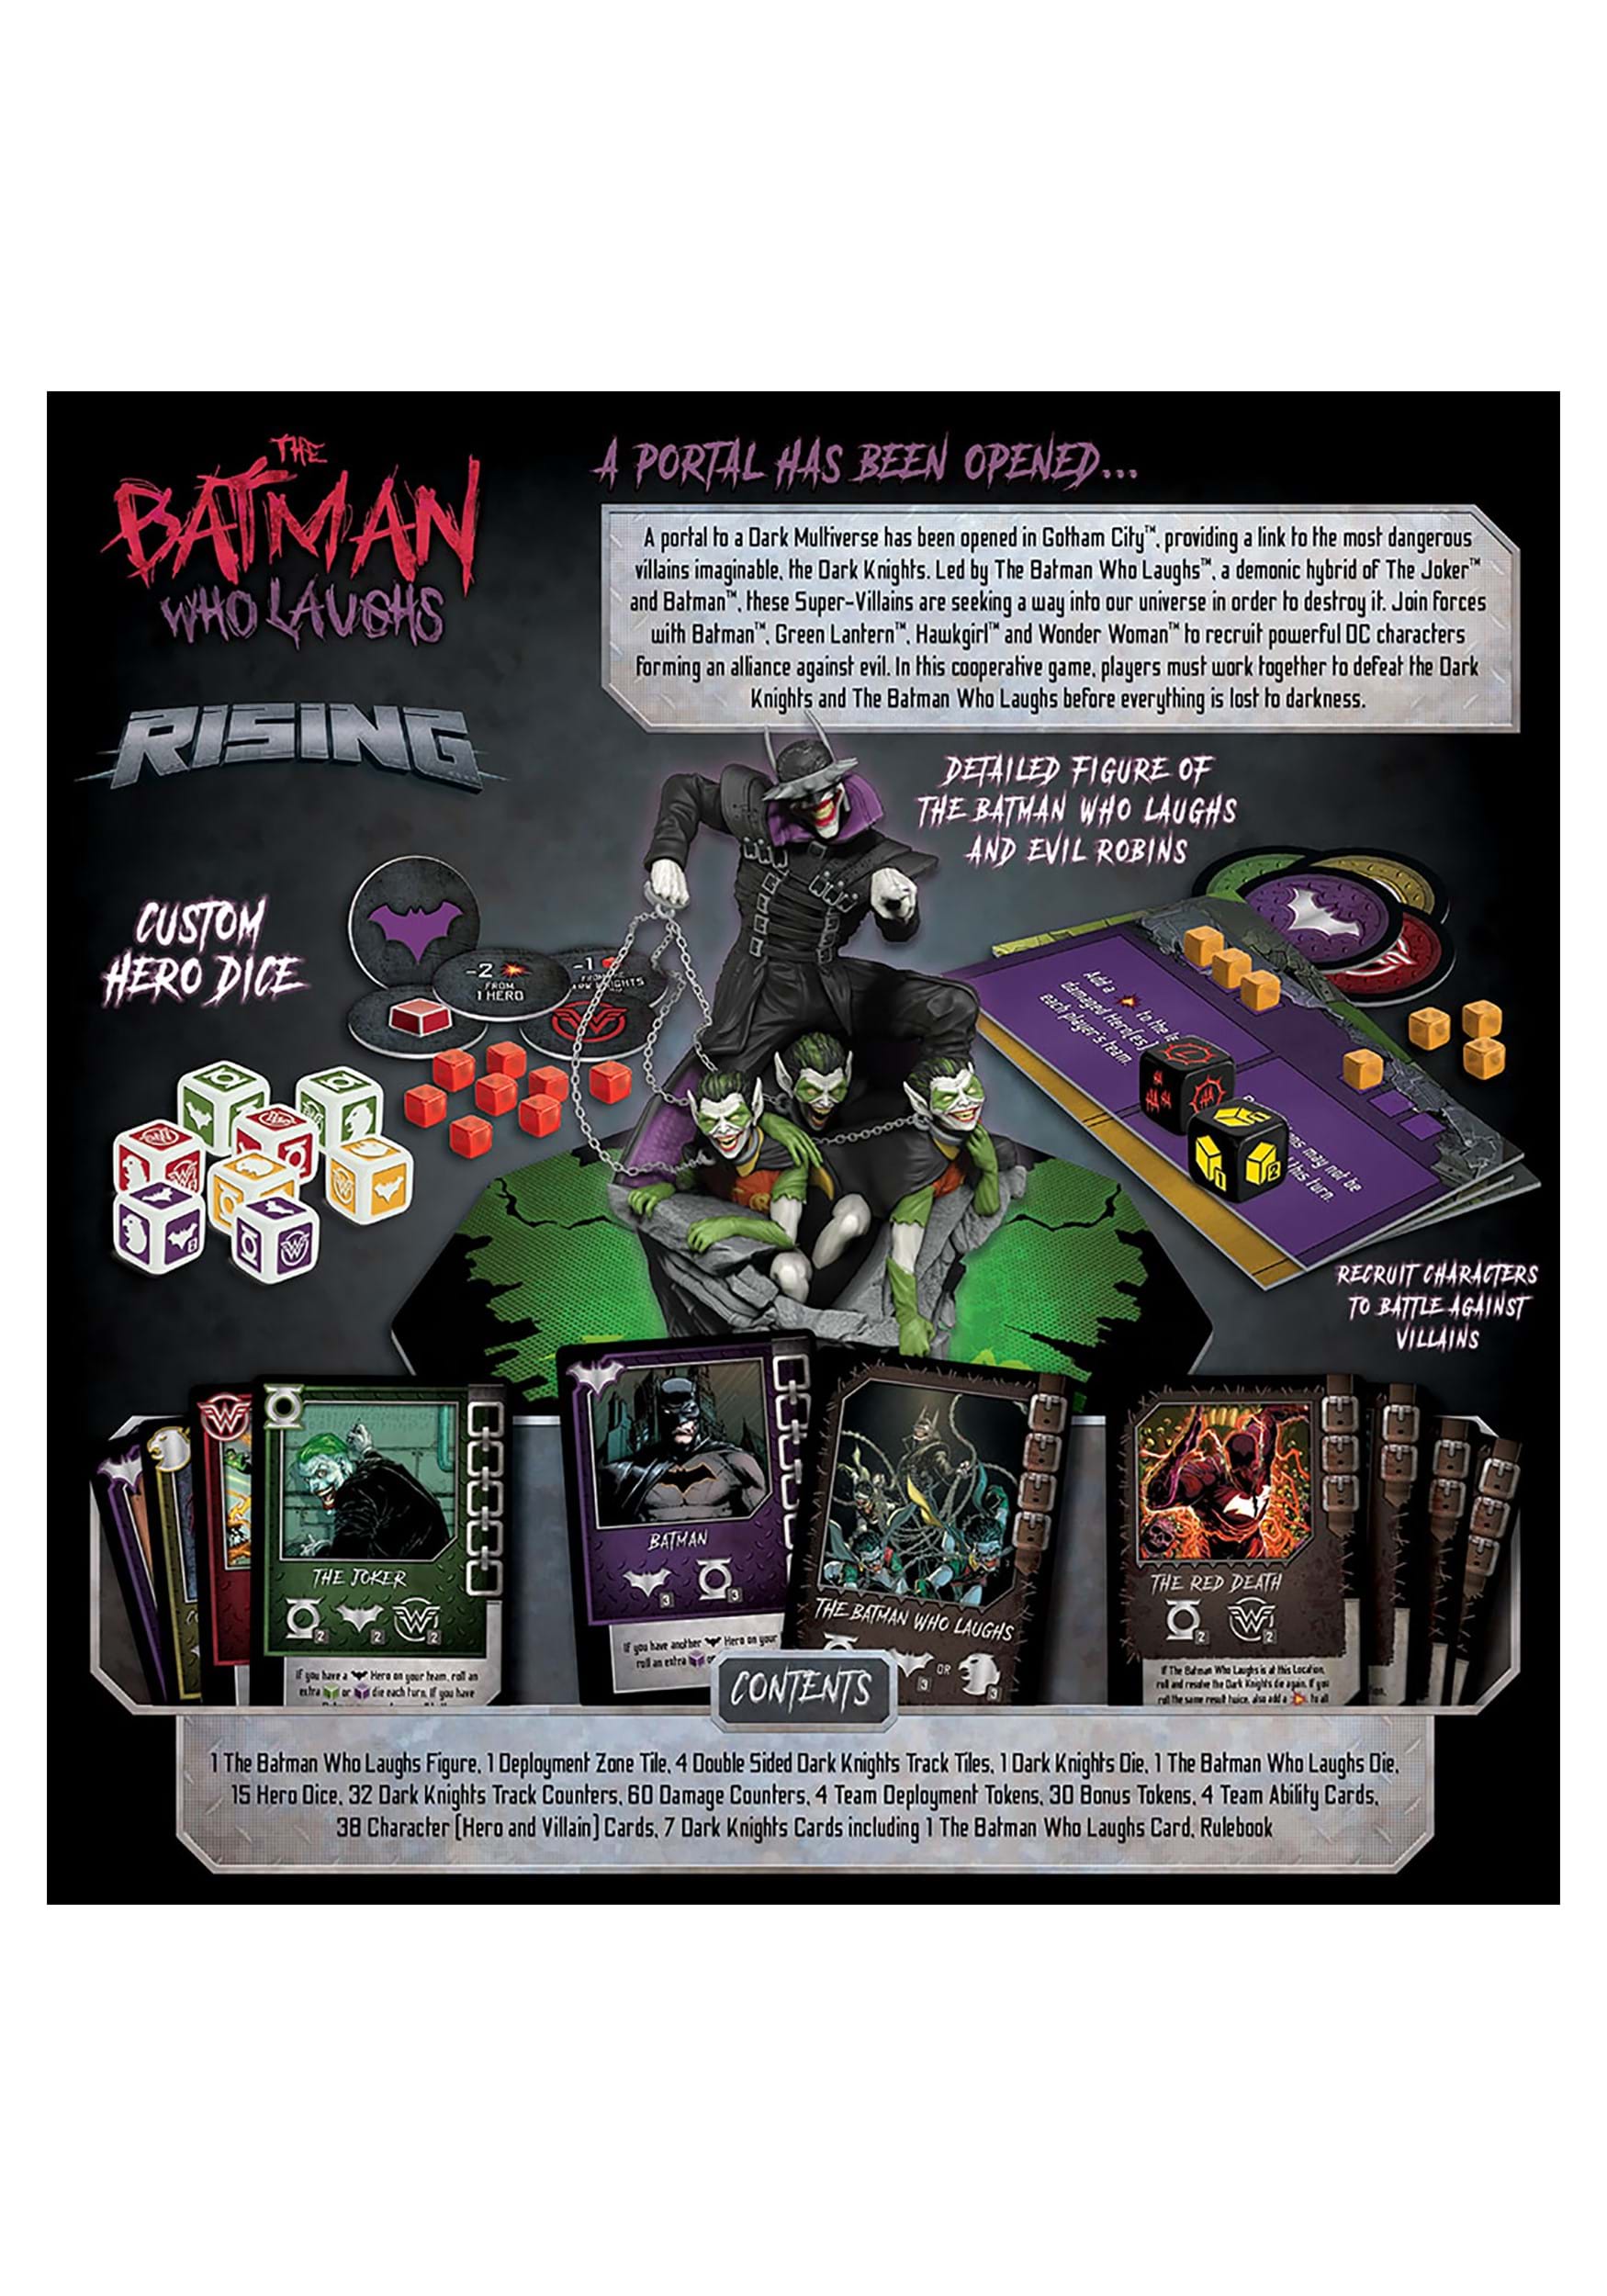 The Batman Who Laughs: Rising Board Game